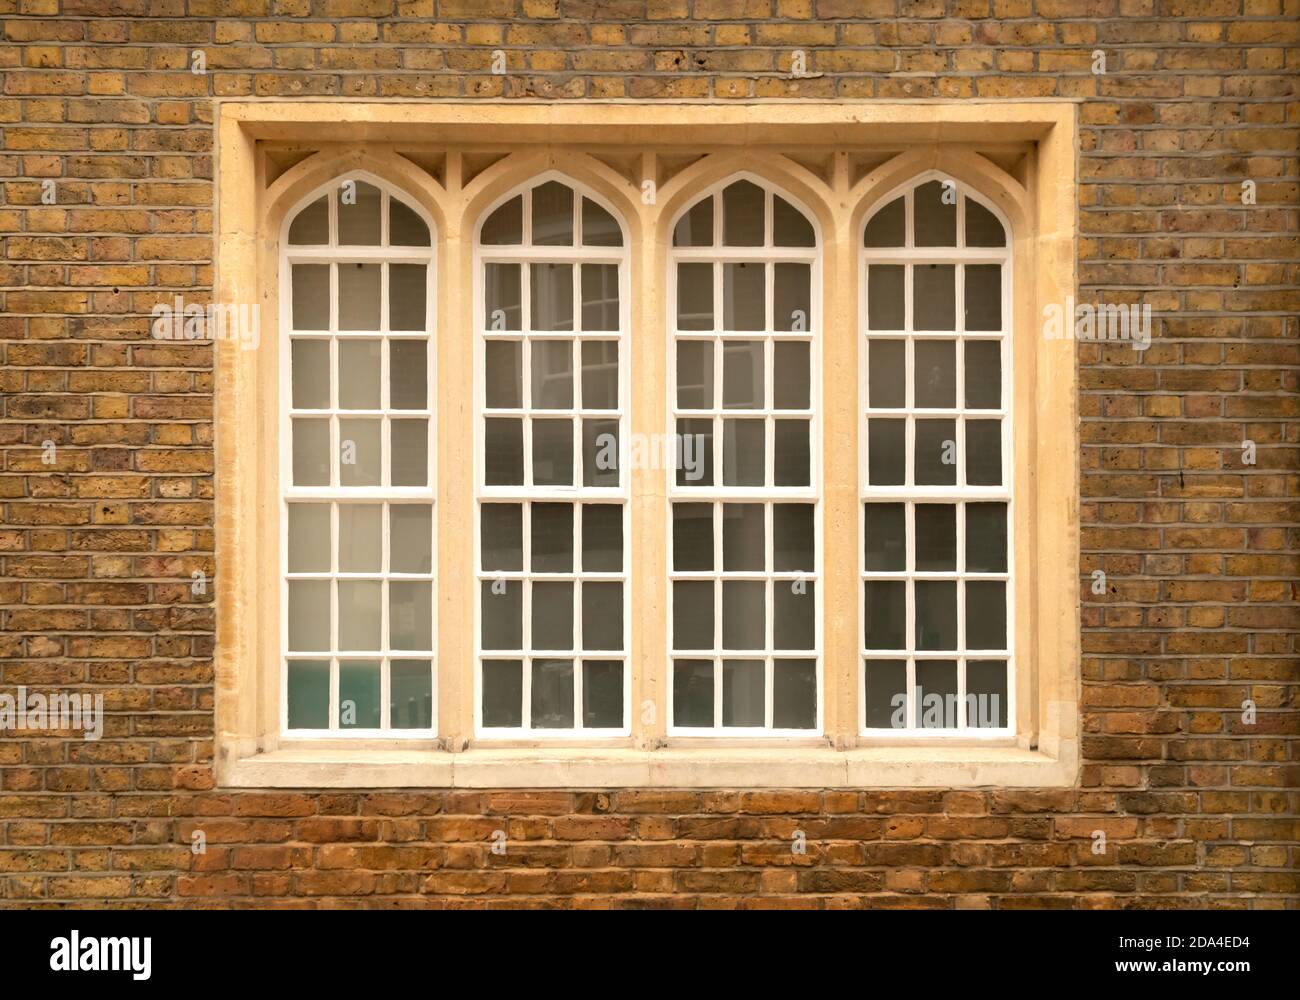 Example of a period window on Plowden buildings, Temple, London. UK Stock Photo